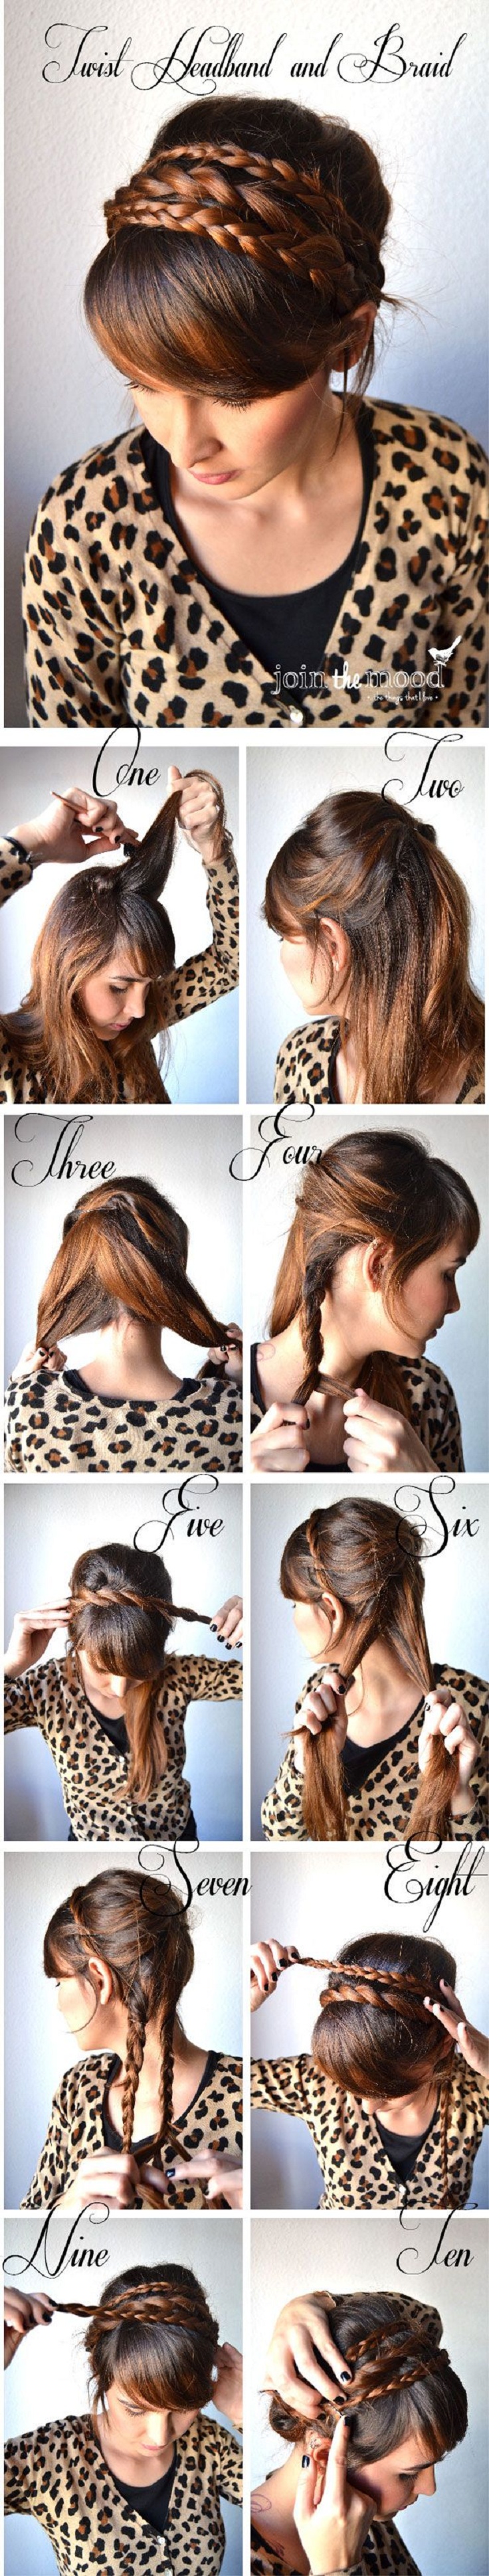 Adorable Hairstyle Tutorials: Braided Updo